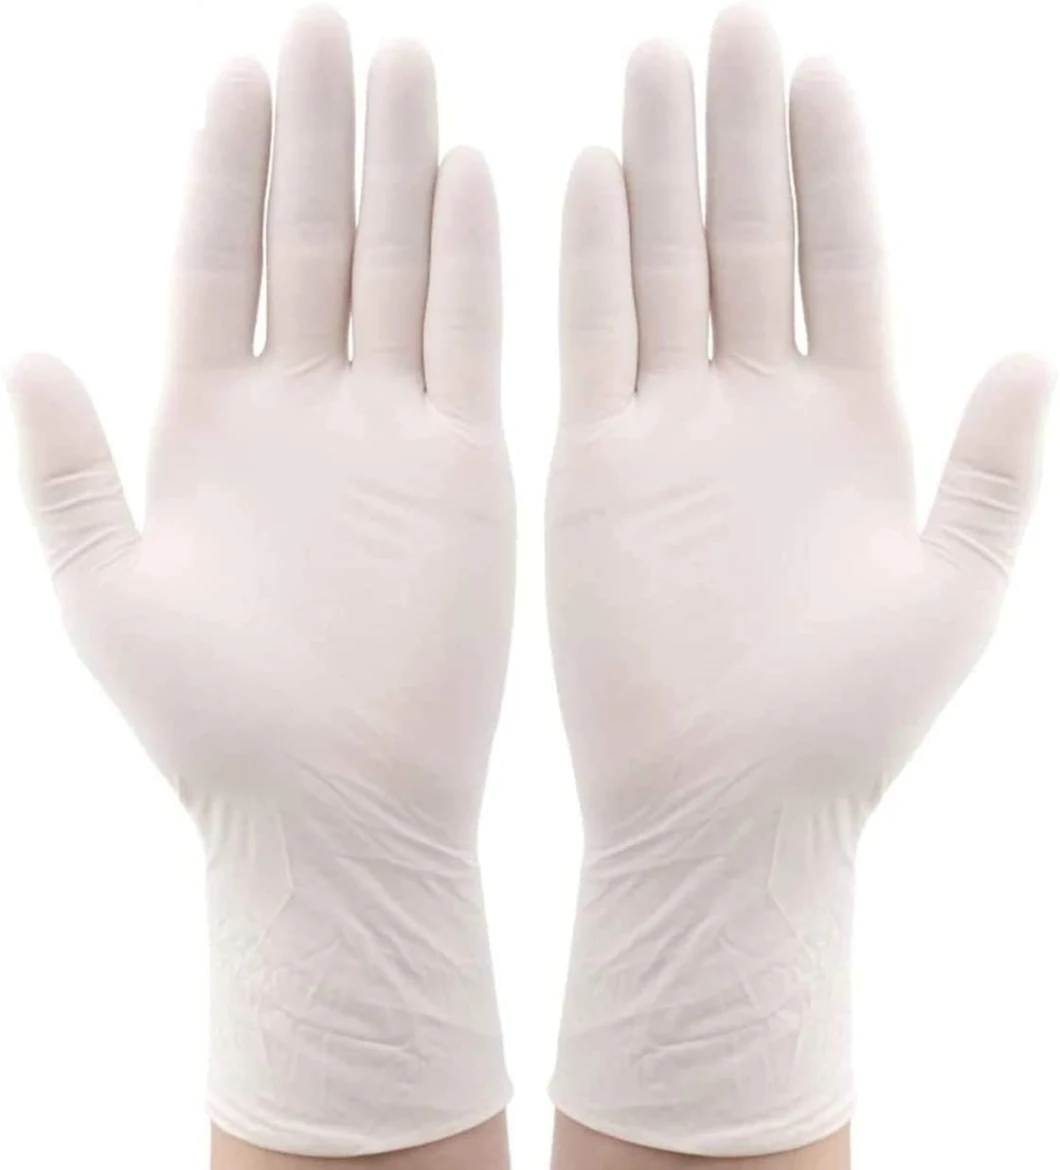 Latex Gloves Latex Gloves Disposable Protective Latex Coated Gloves Hand